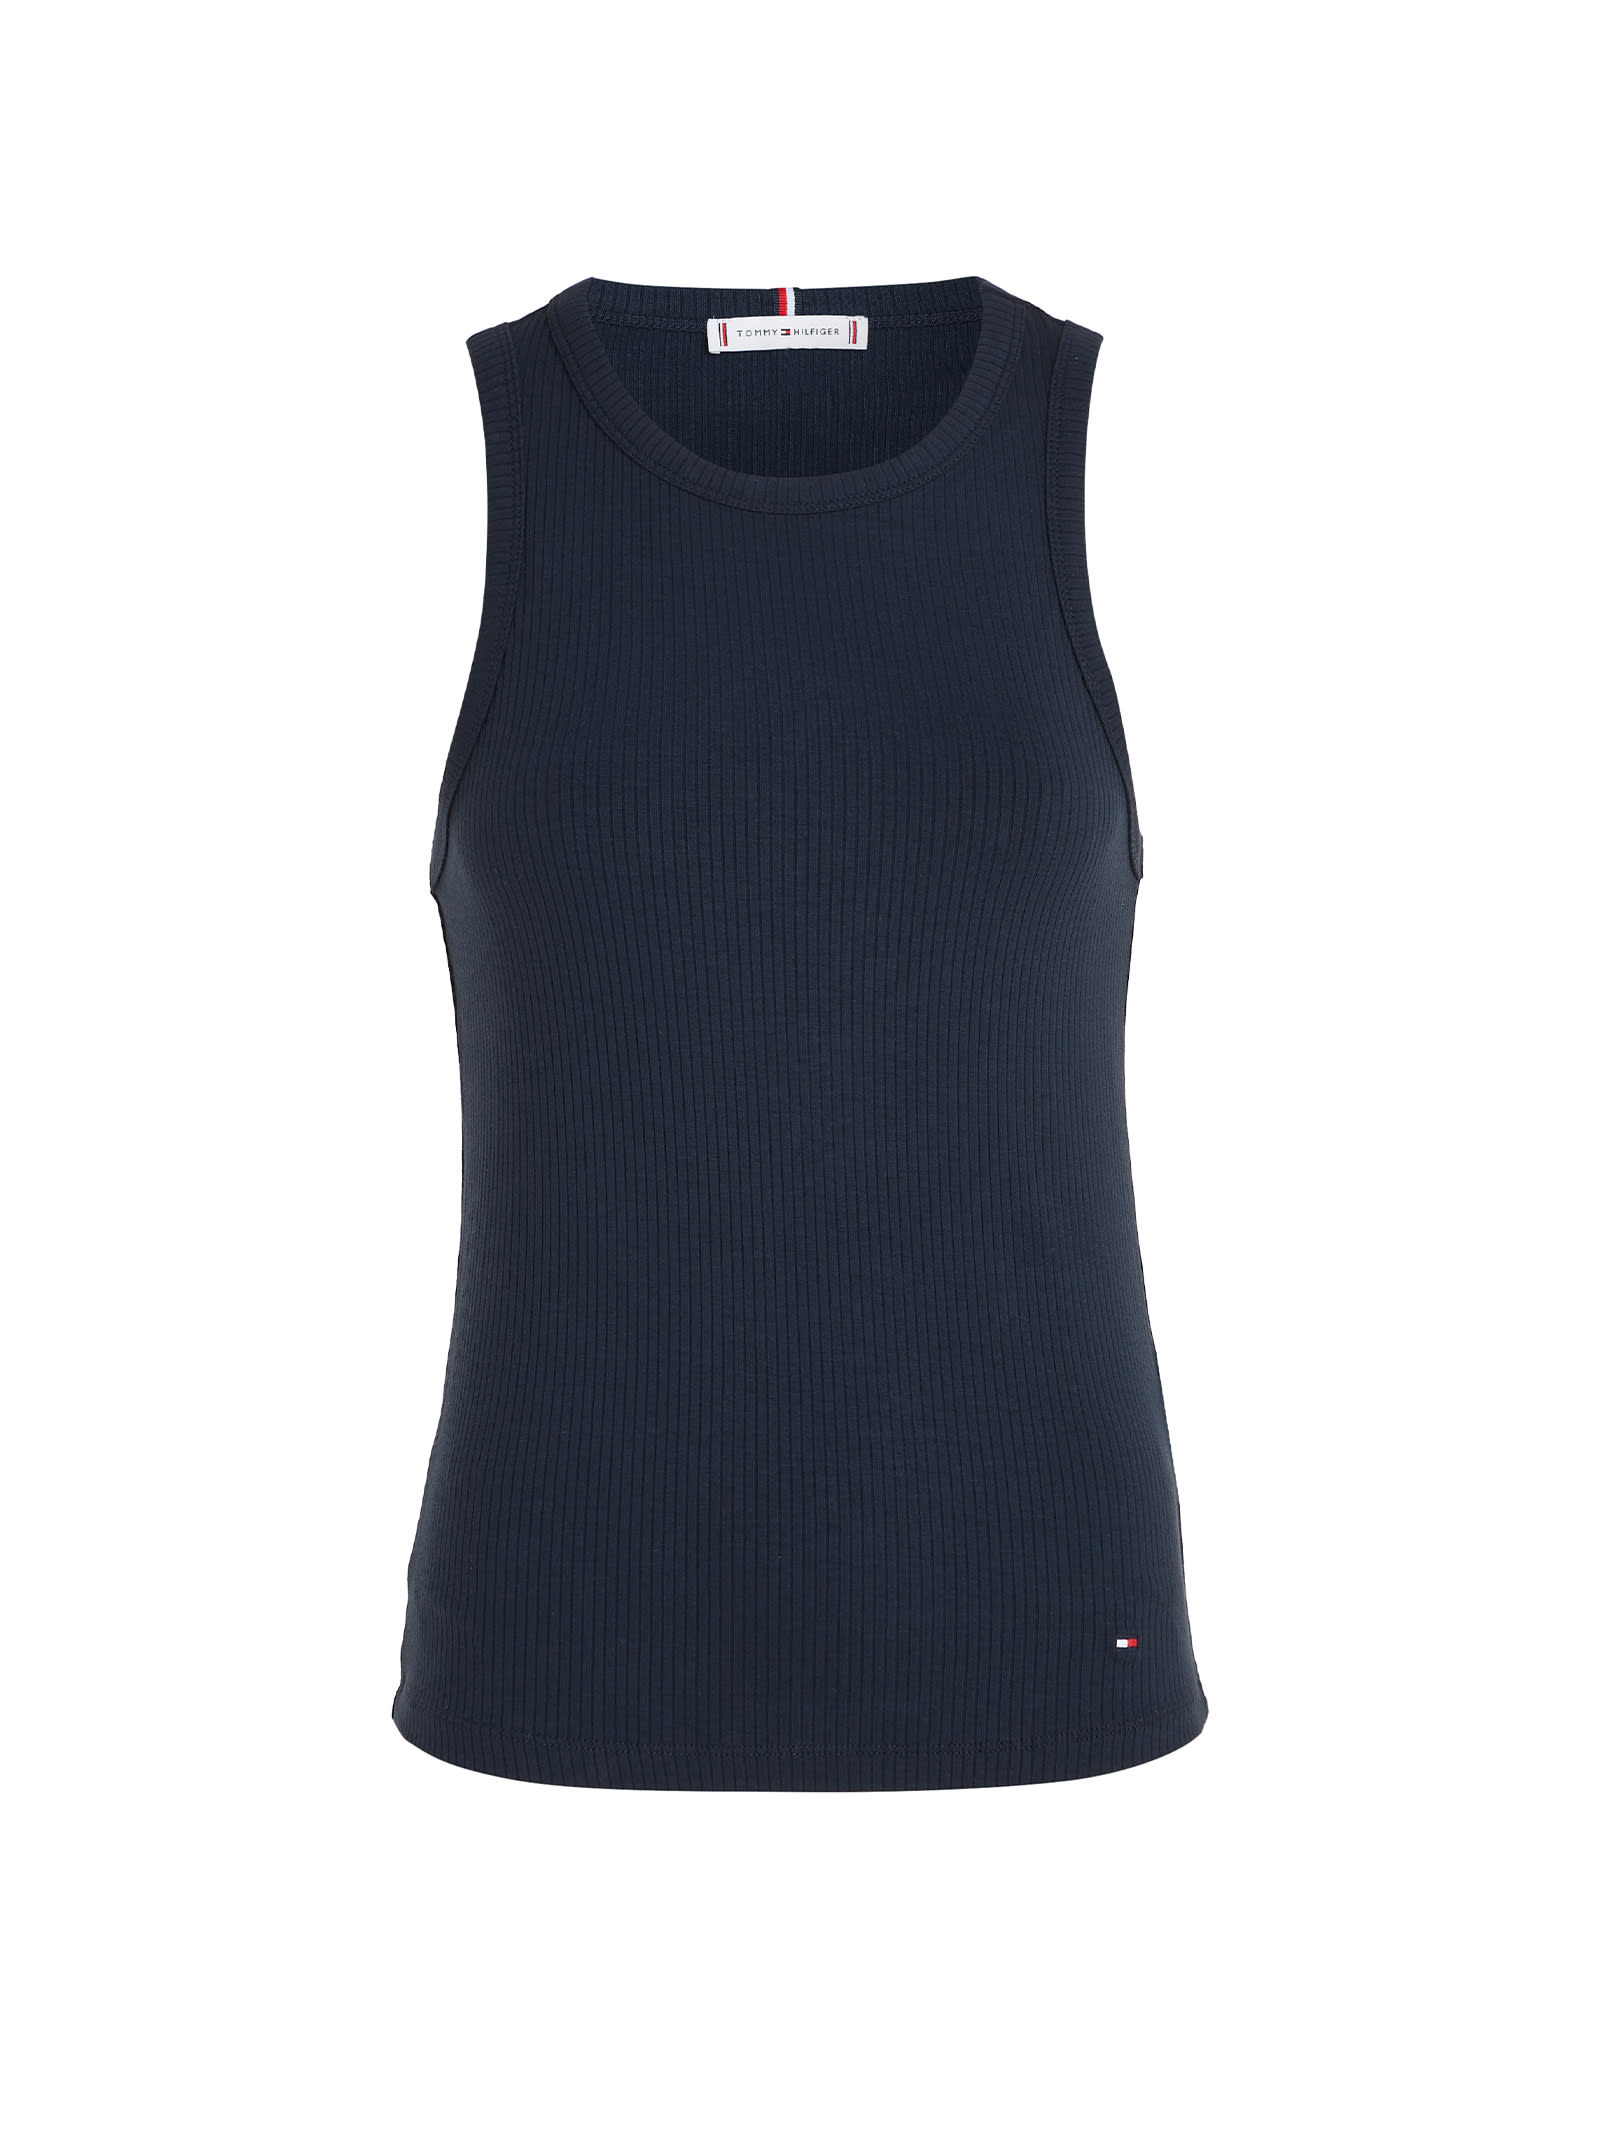 Navy Blue Top With Mini Logo